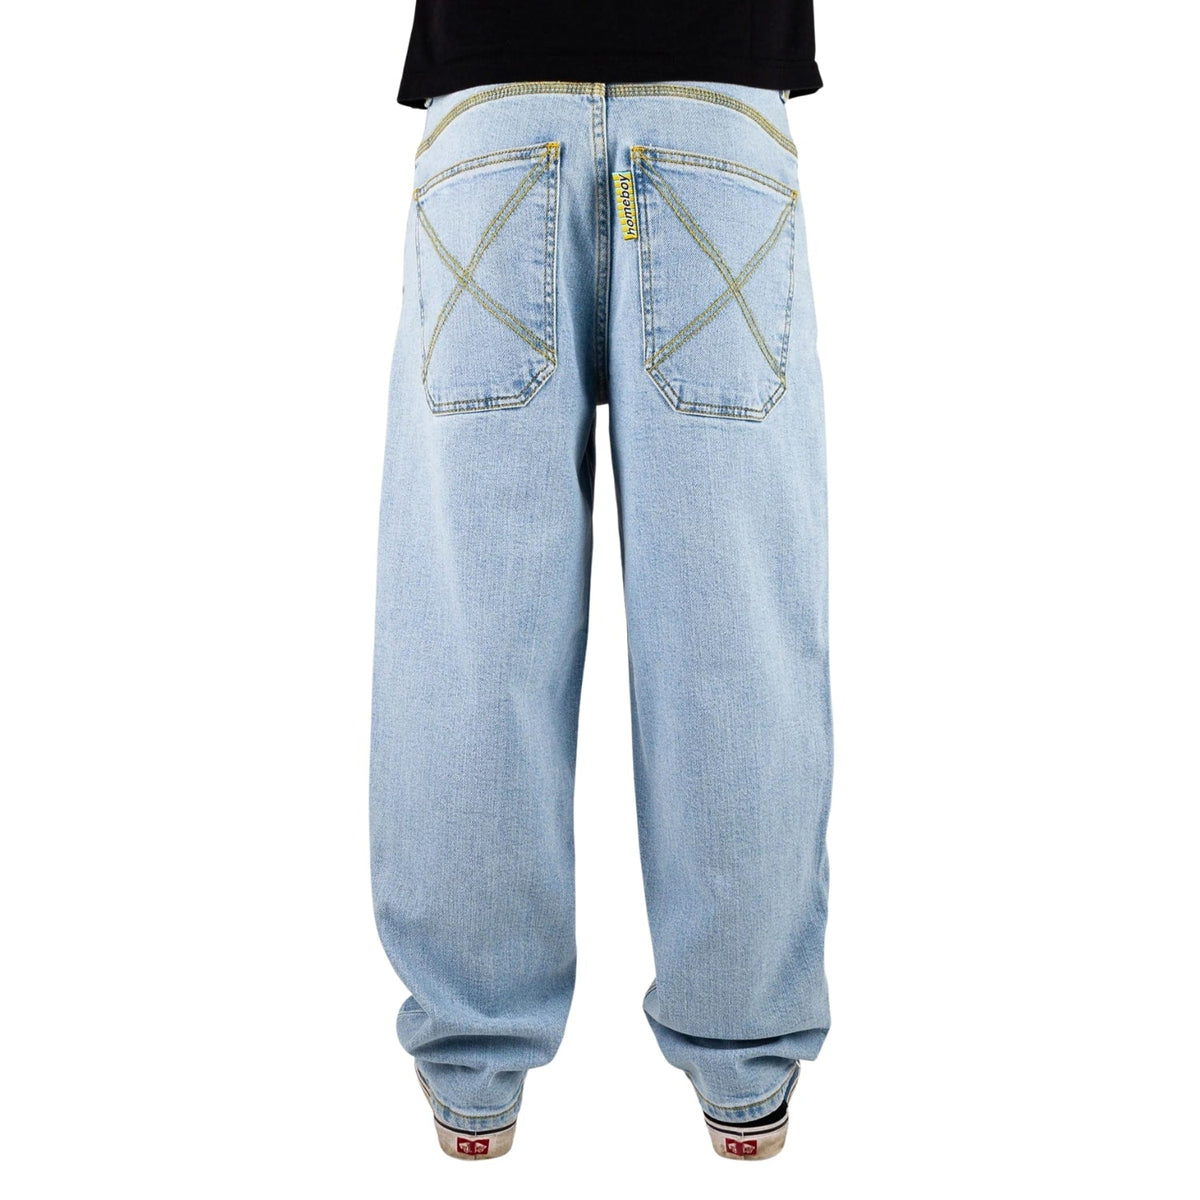 Home Boy X-Tra Baggy Denim - Moon - Mens Relaxed/Loose Denim Jeans by Home Boy